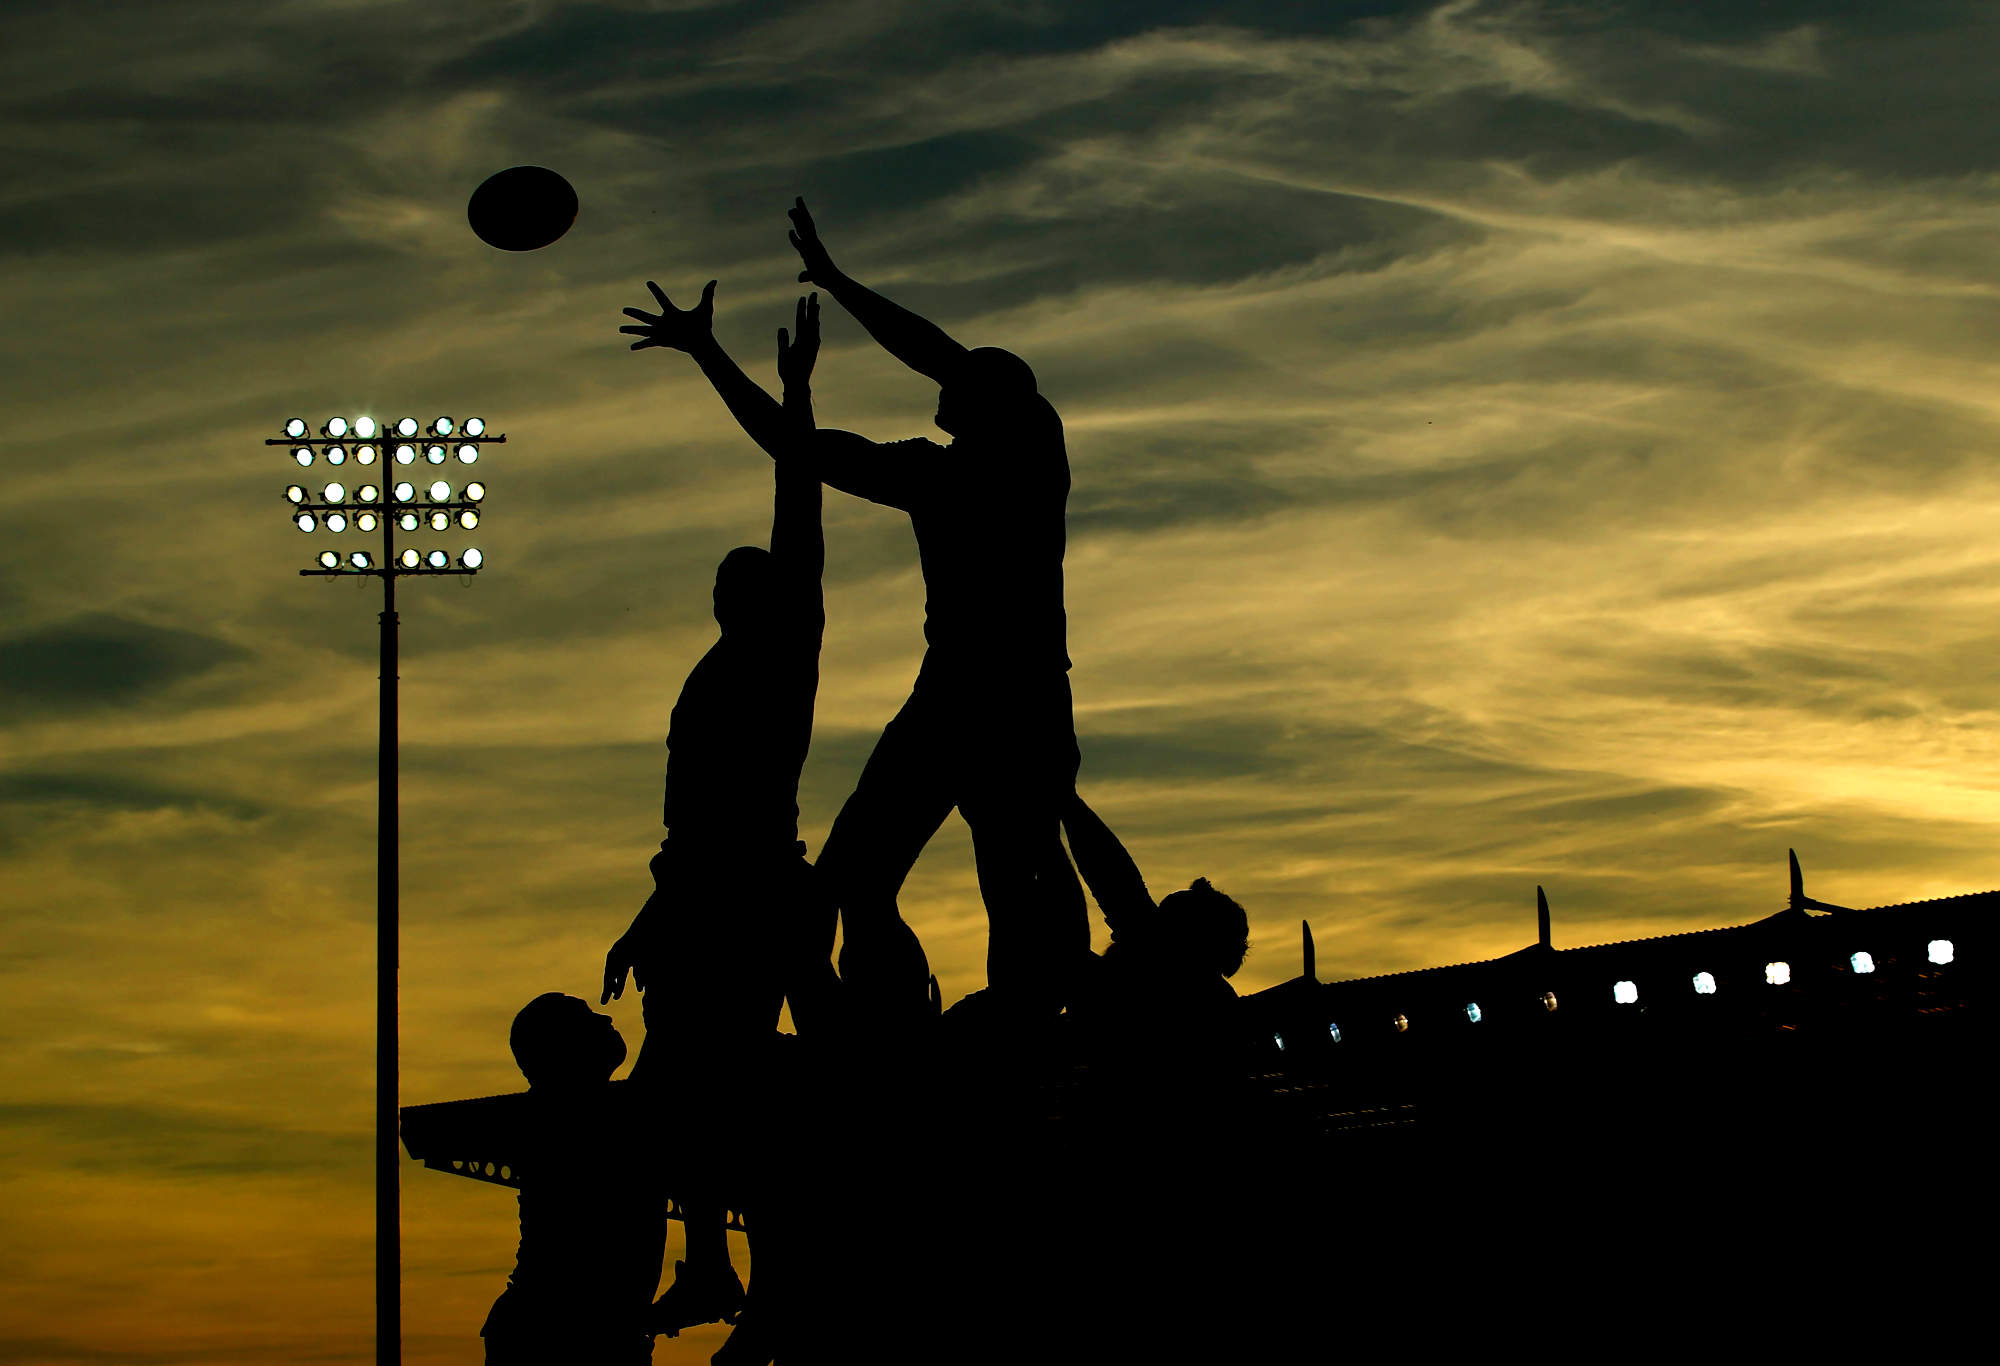 A general view of a lineout at sunset